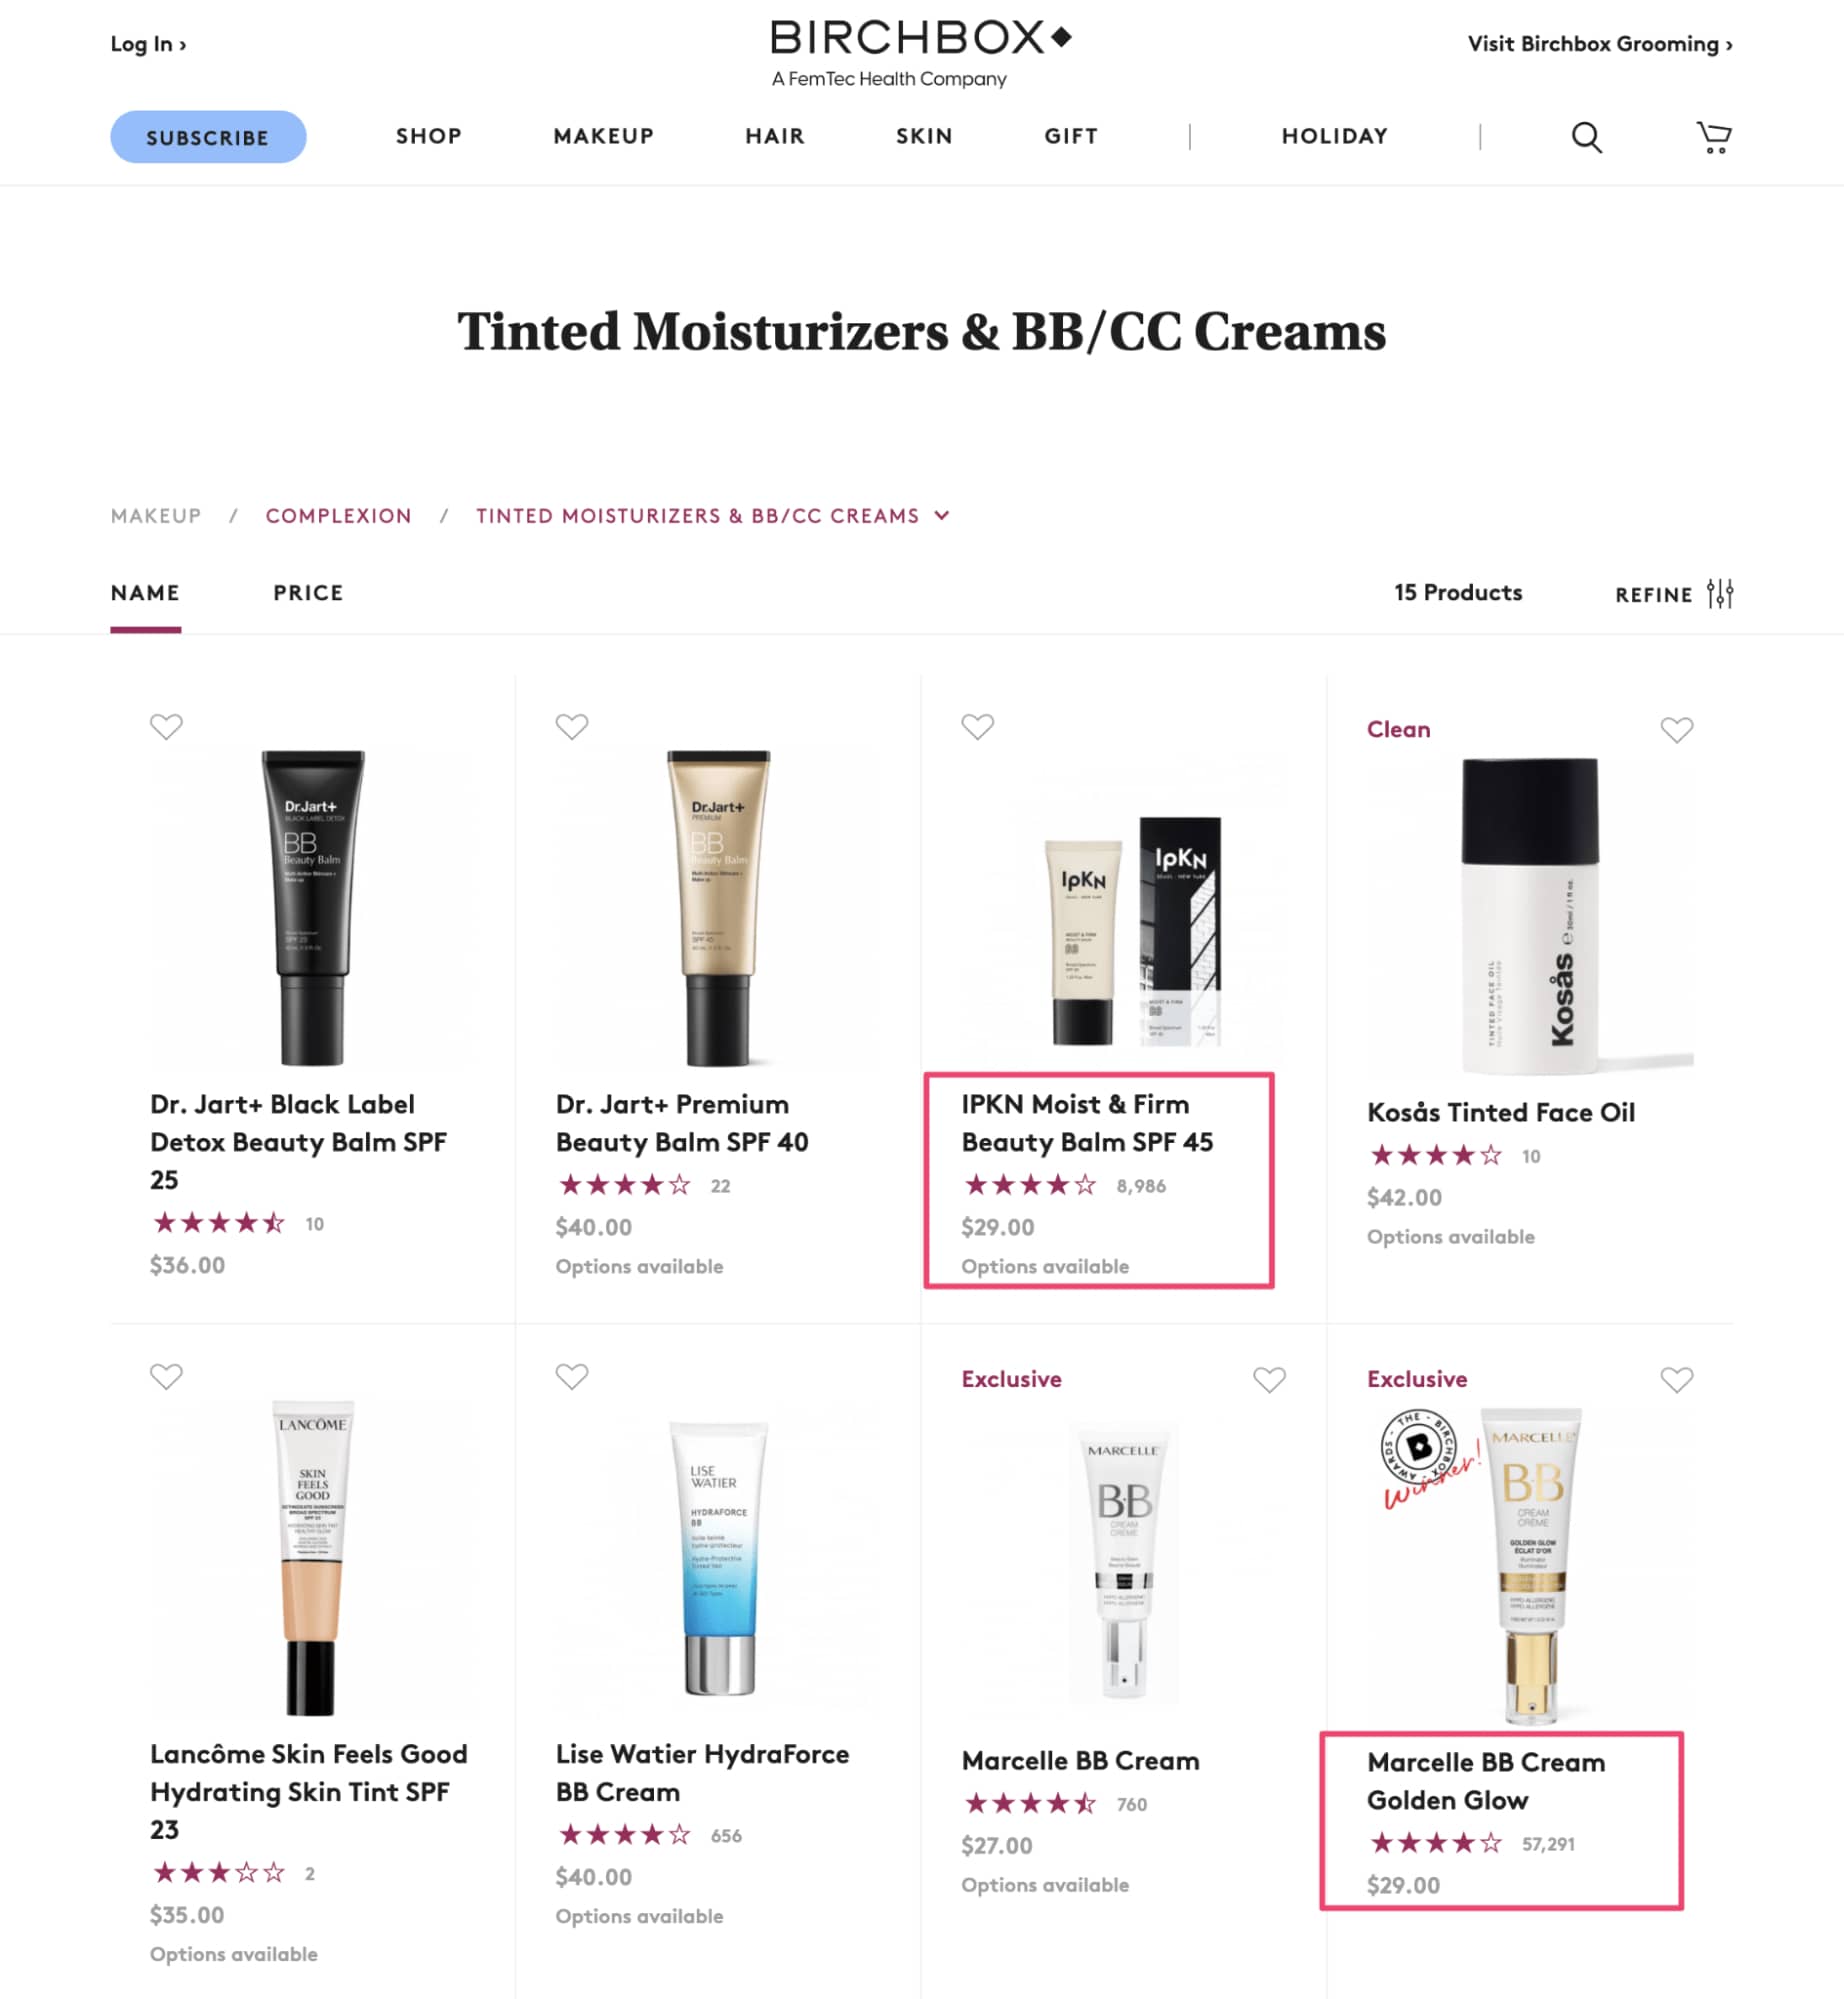 birchbox product star ratings on collection pages